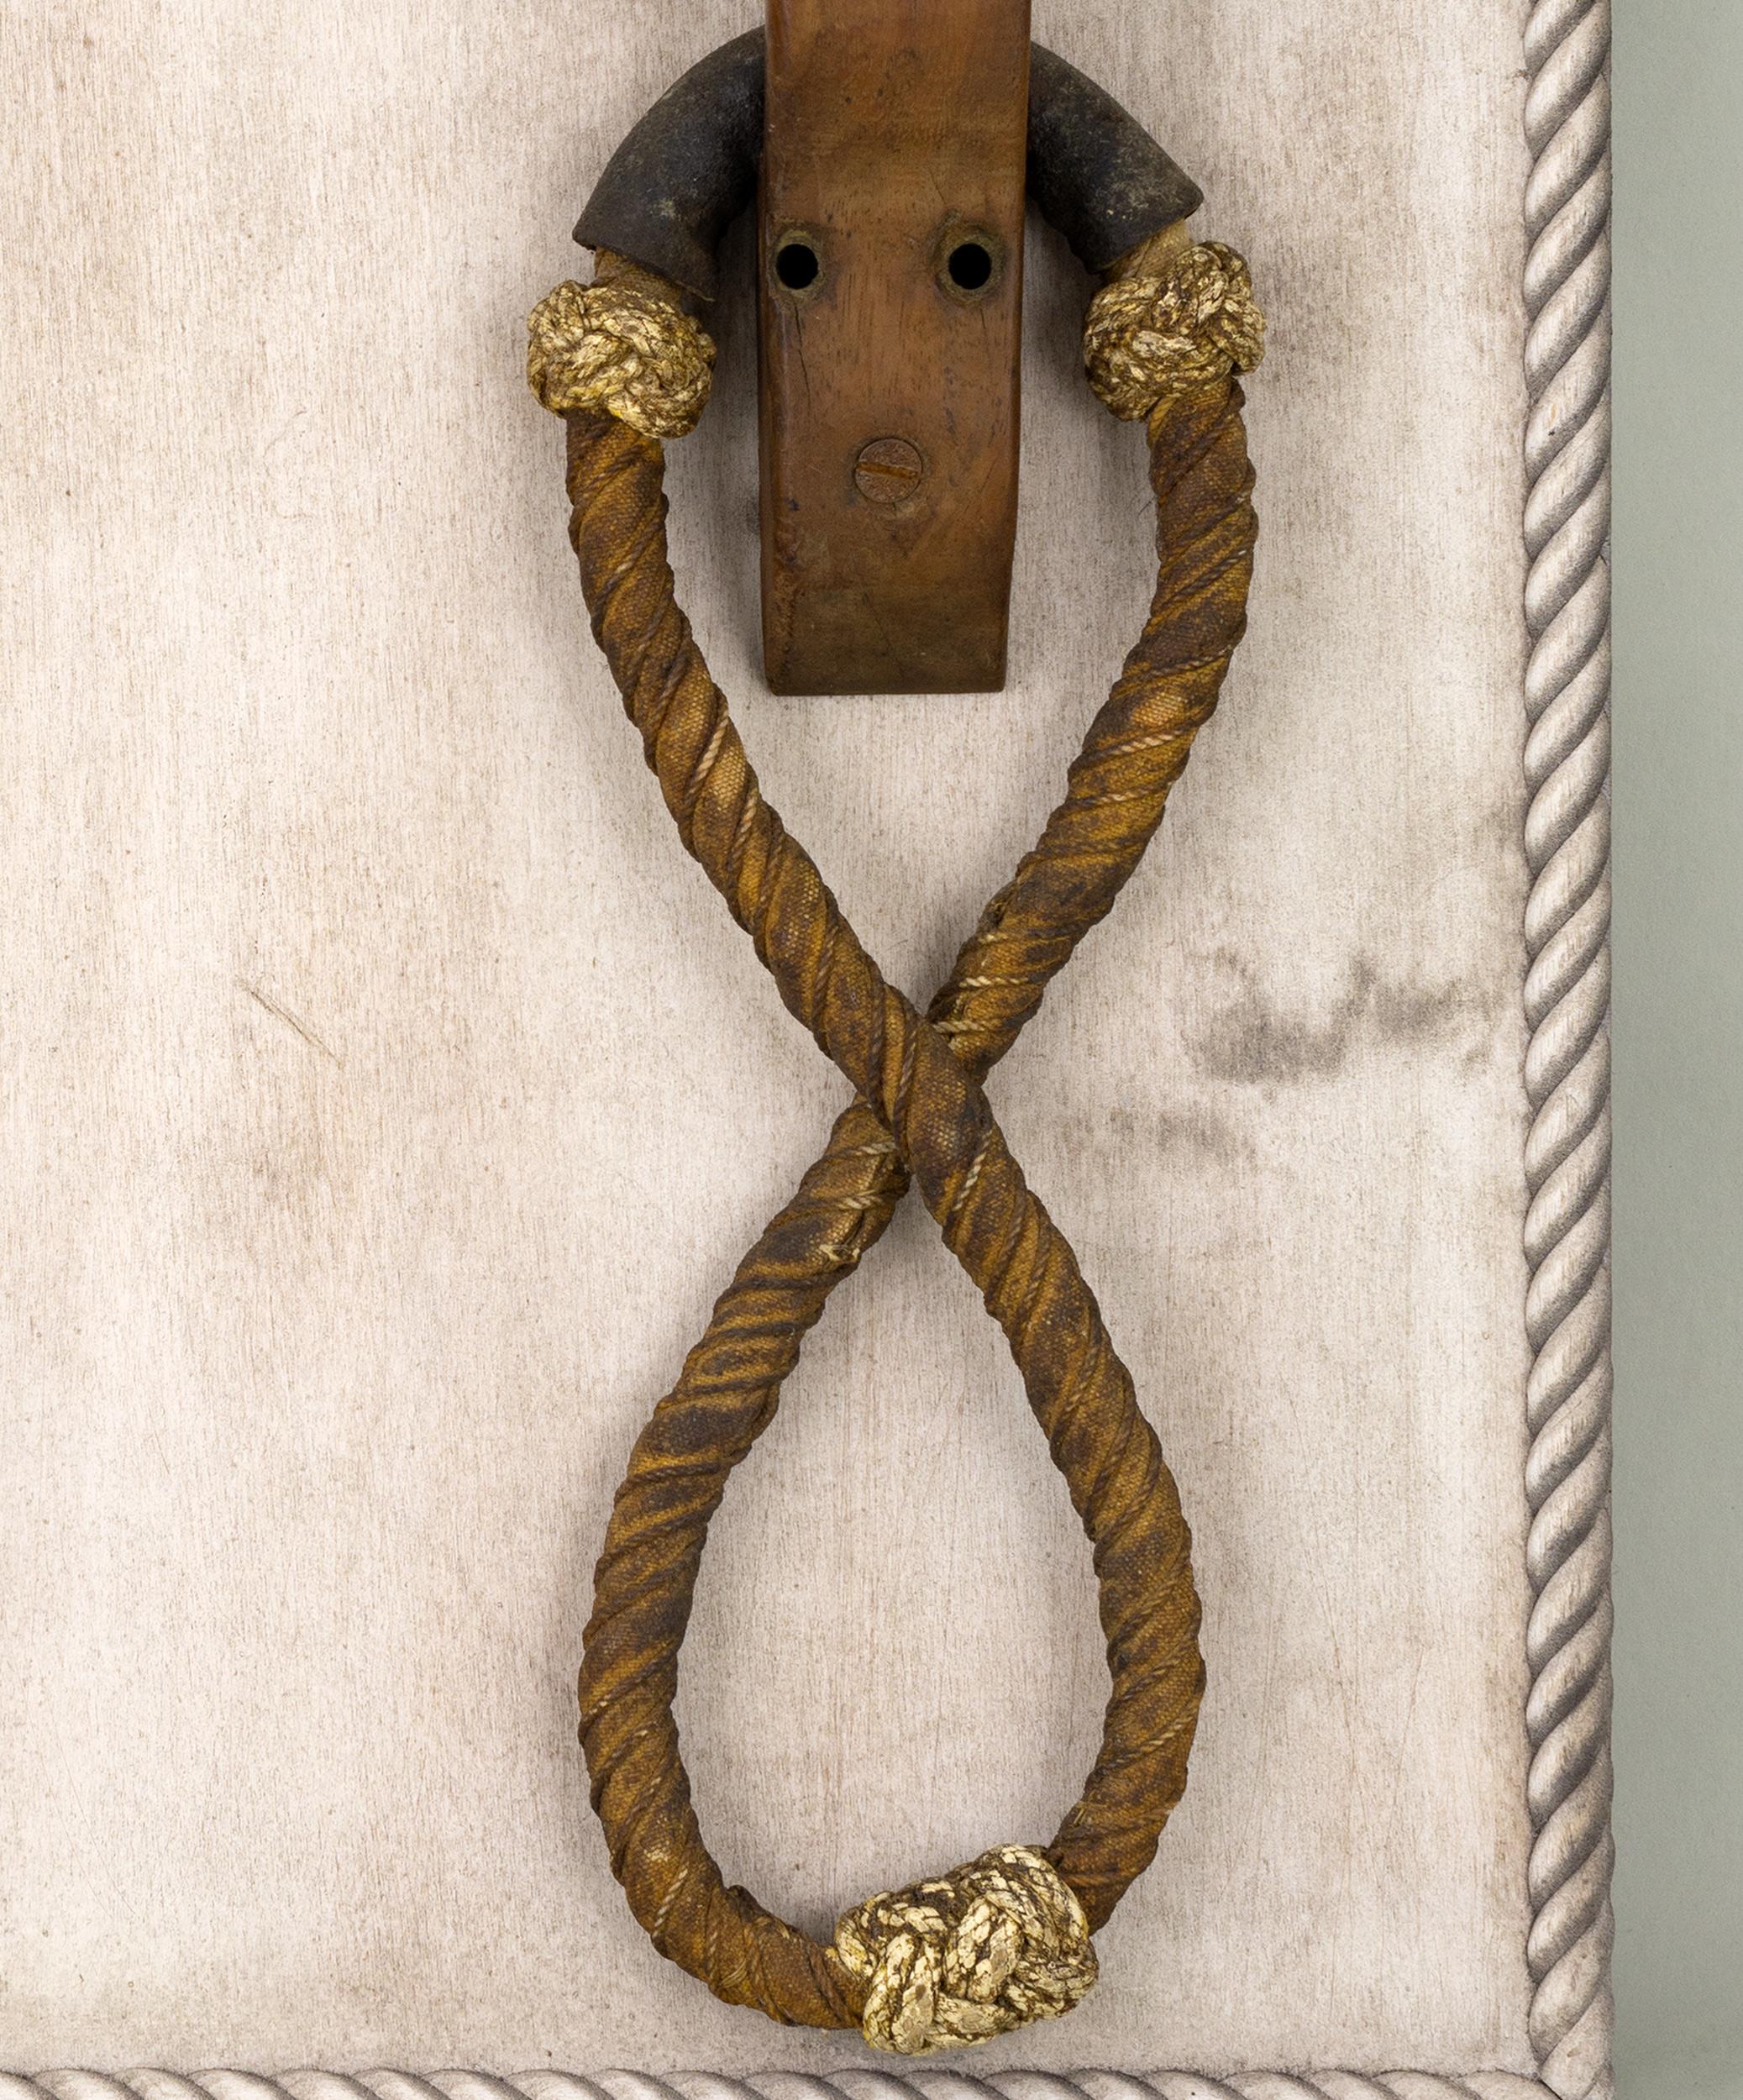 Rare sailor-made figure-eight rope beckets with natural canvas and cord covering, leather hinge roll, 'Turk's Head' macrame bumpers painted white, having carved mahogany brackets with five-pointed inlaid stars, mounted on a whitewashed board with